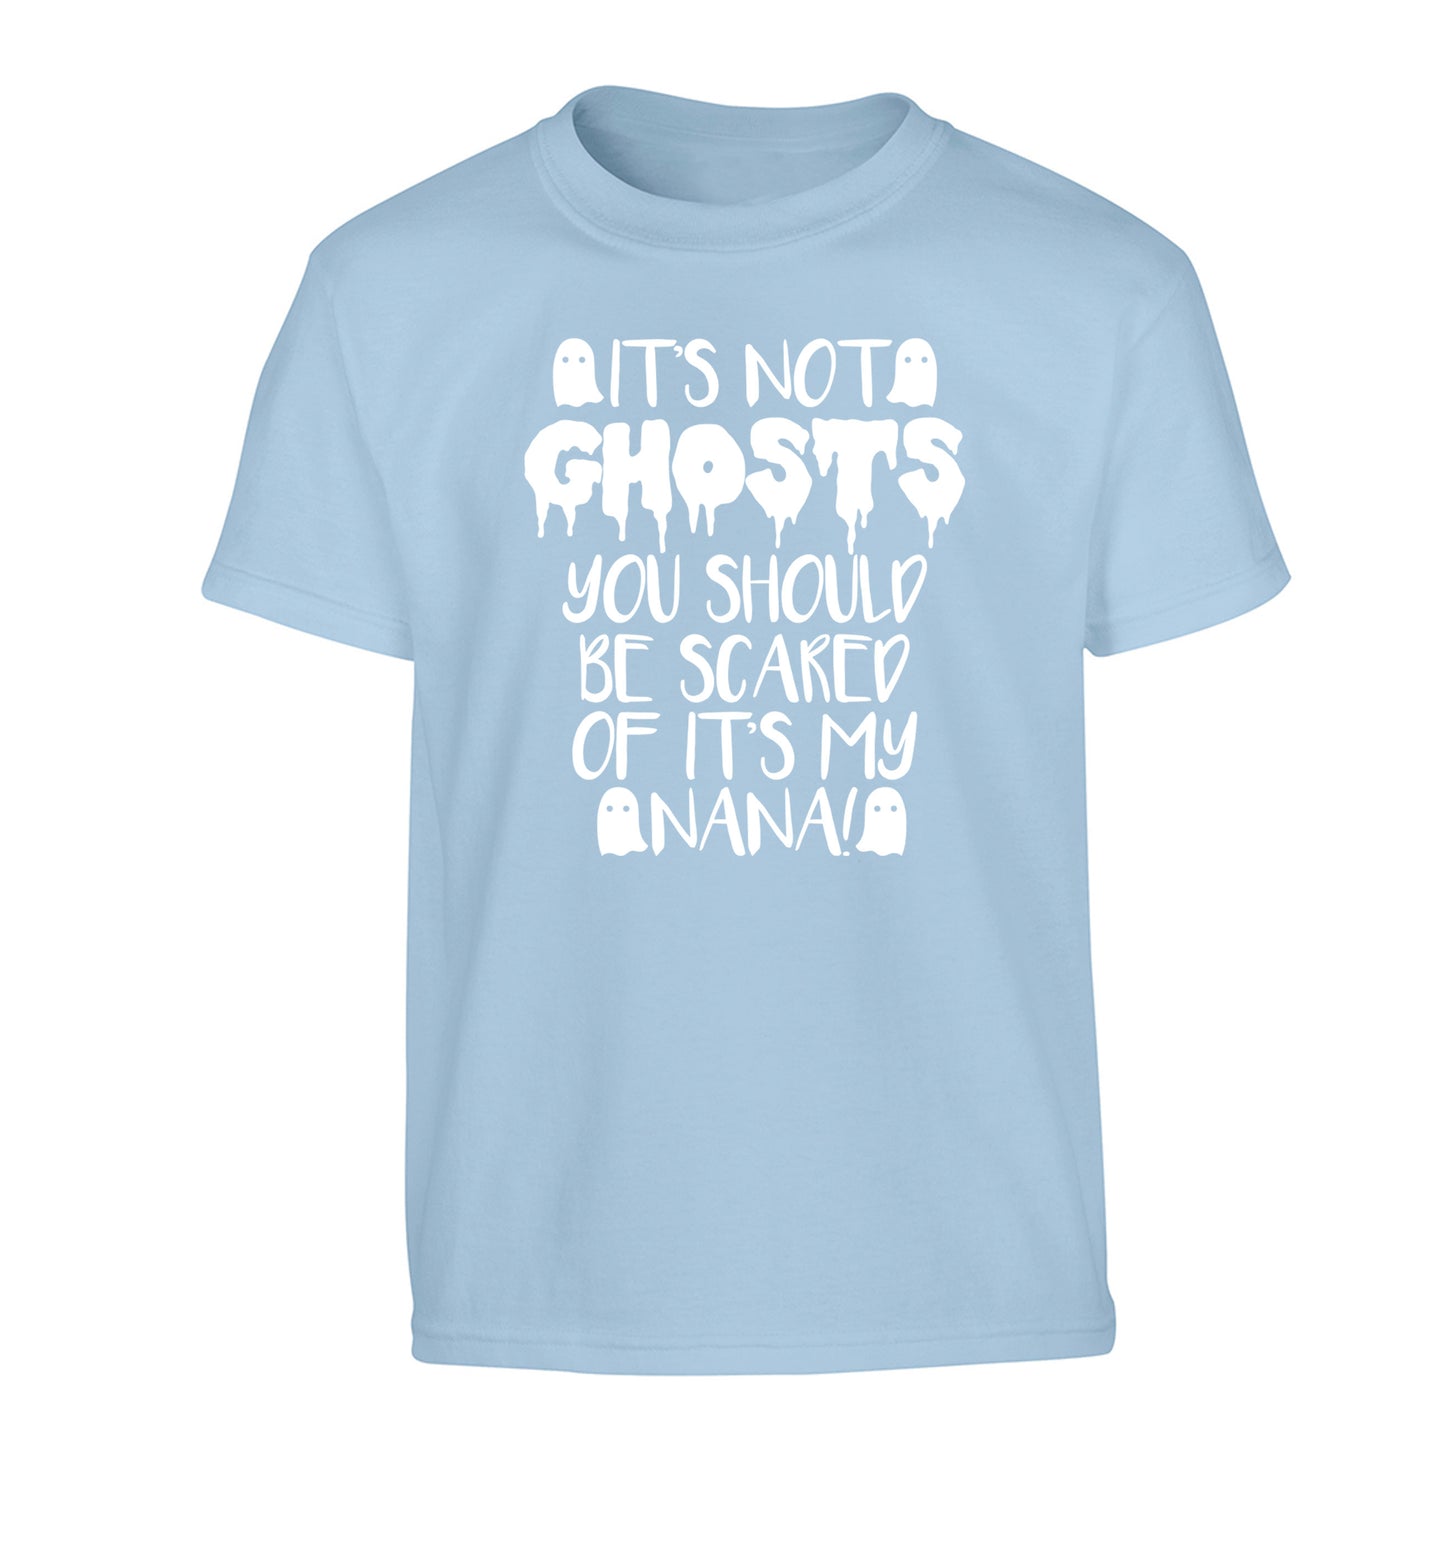 It's not ghosts you should be scared of it's my nana! Children's light blue Tshirt 12-14 Years